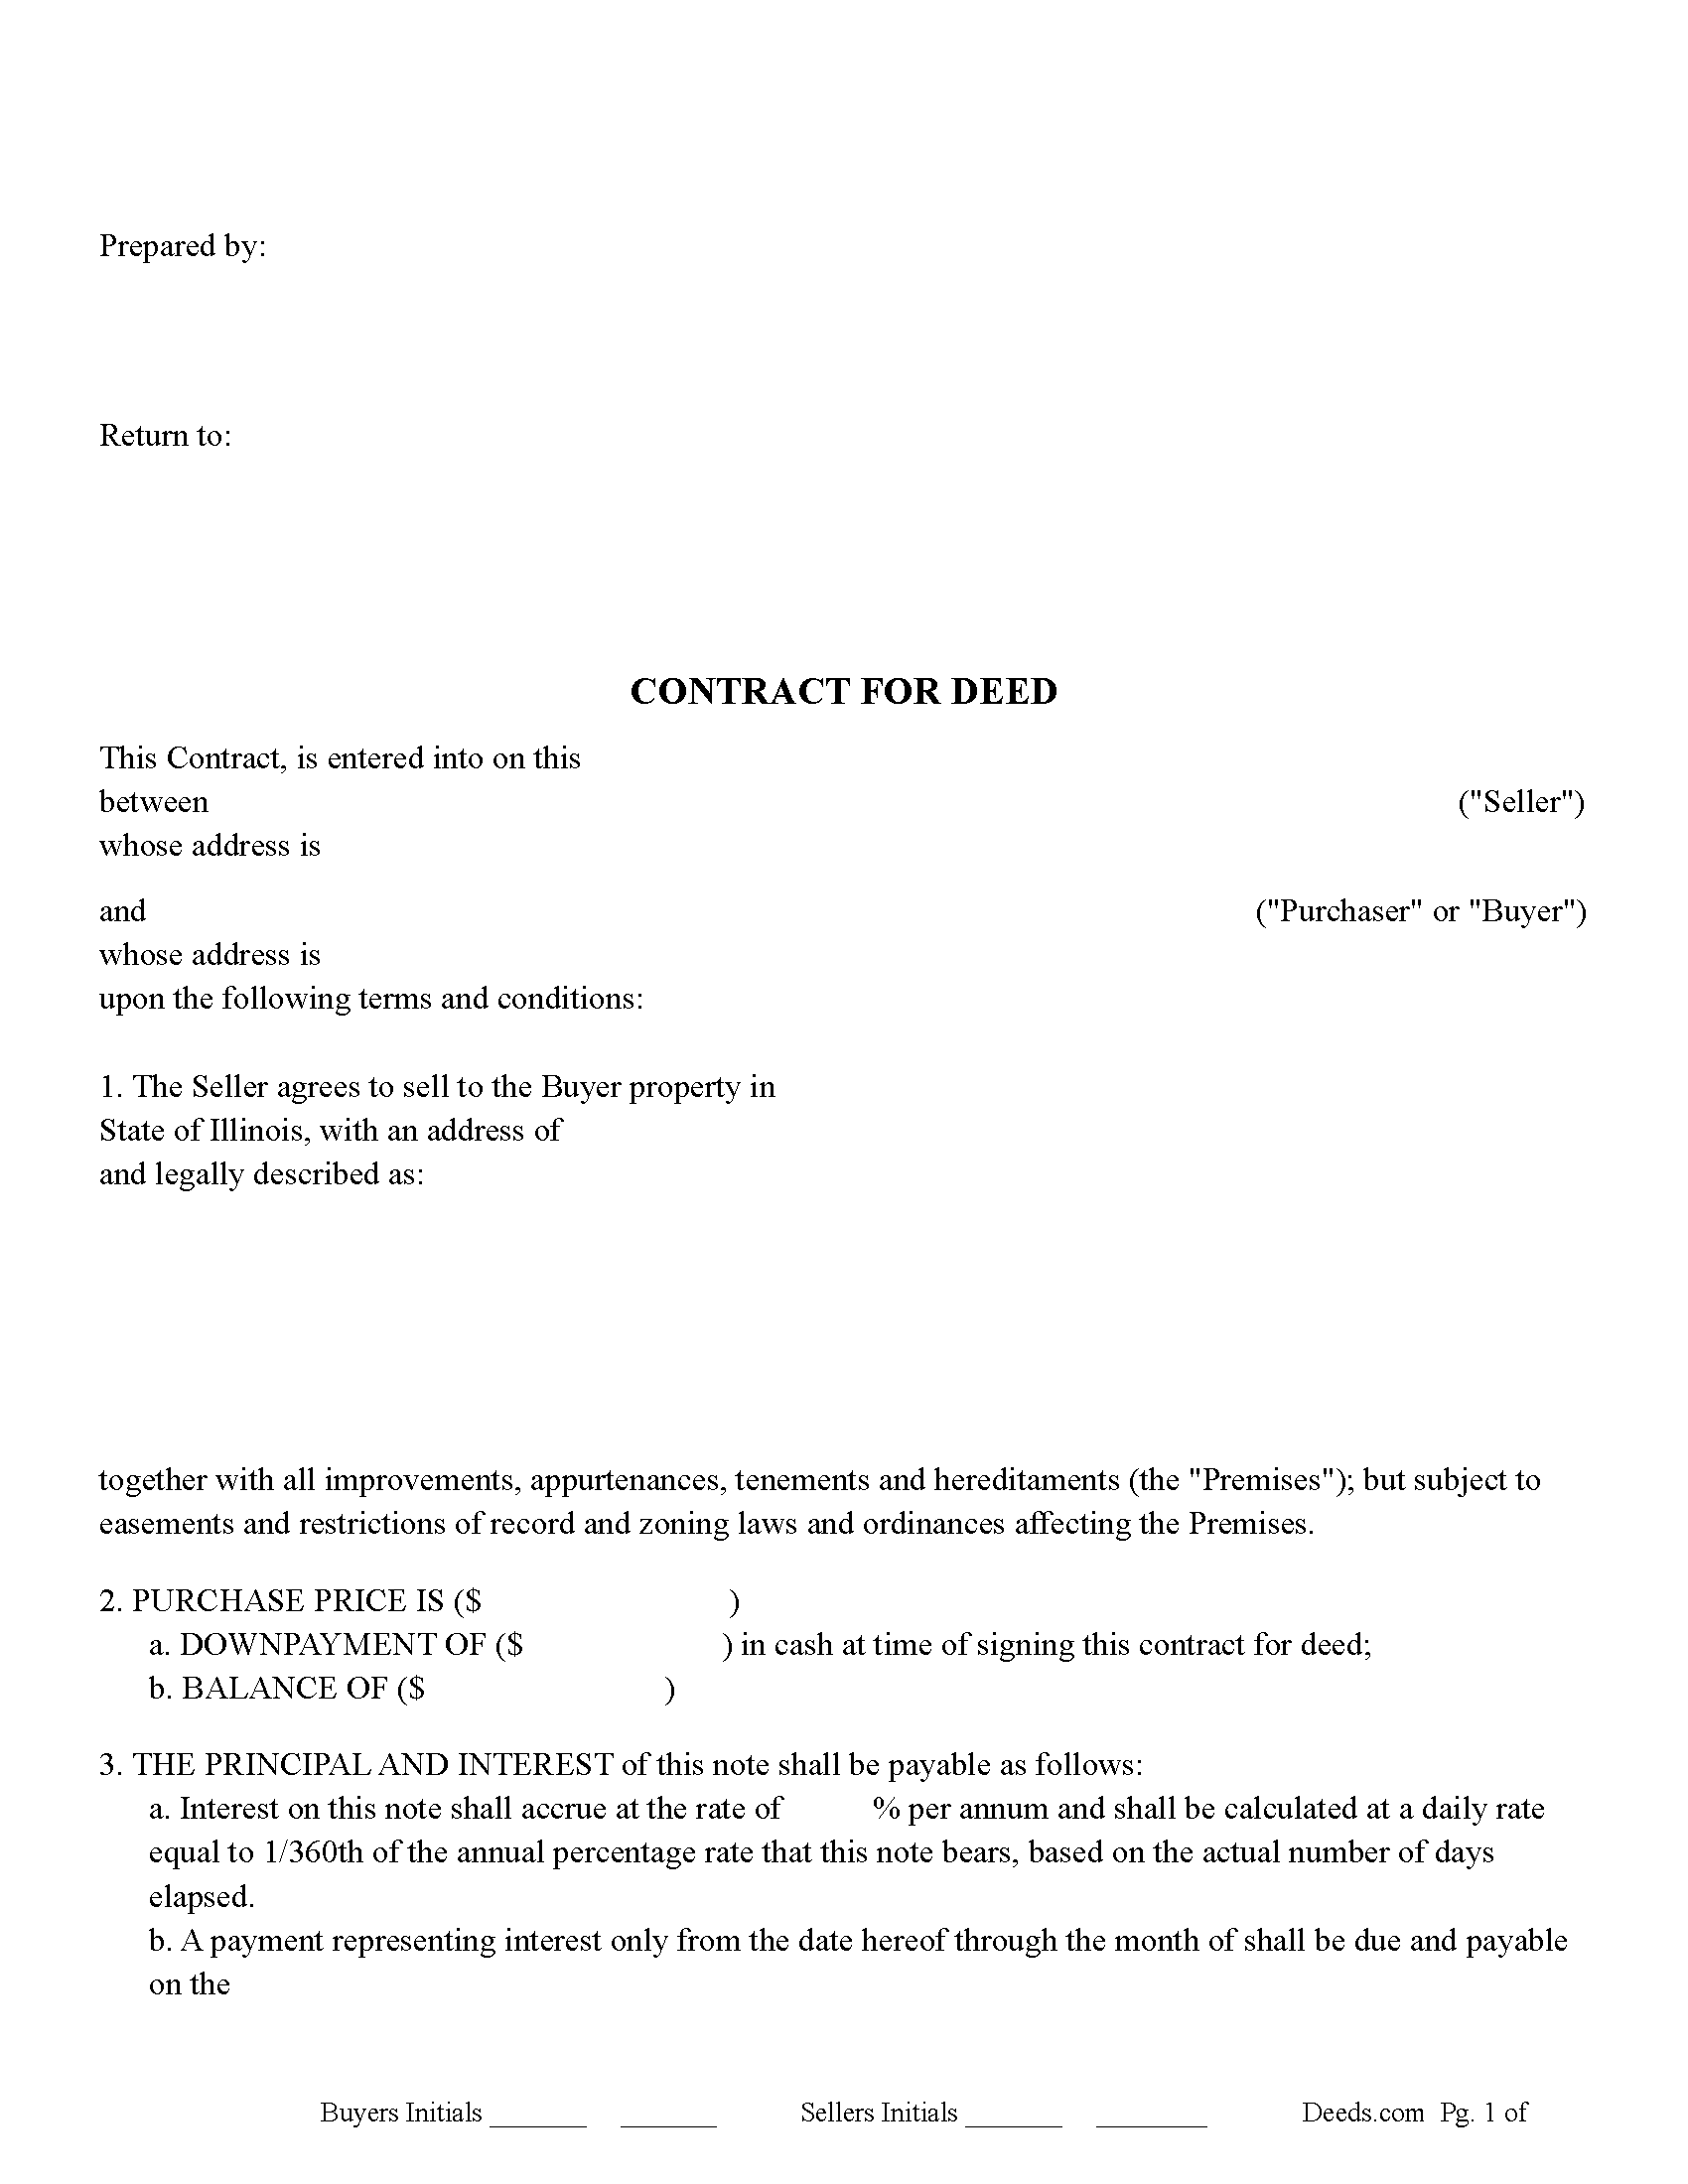 Greene County Contract for Deed Form